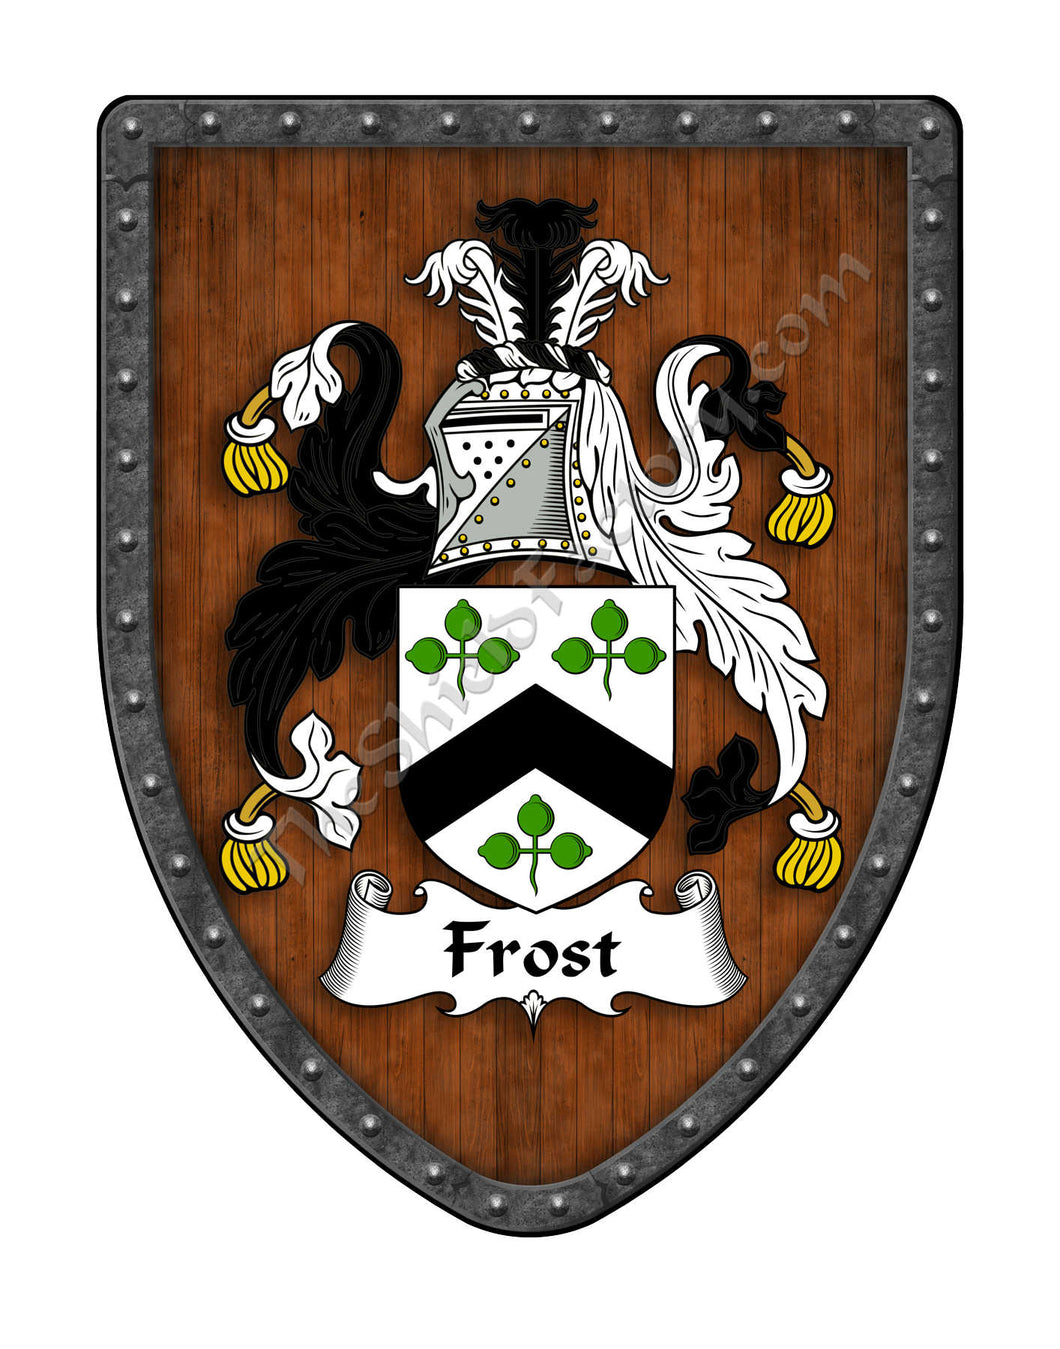 Frost Coat of Arms Family Crest